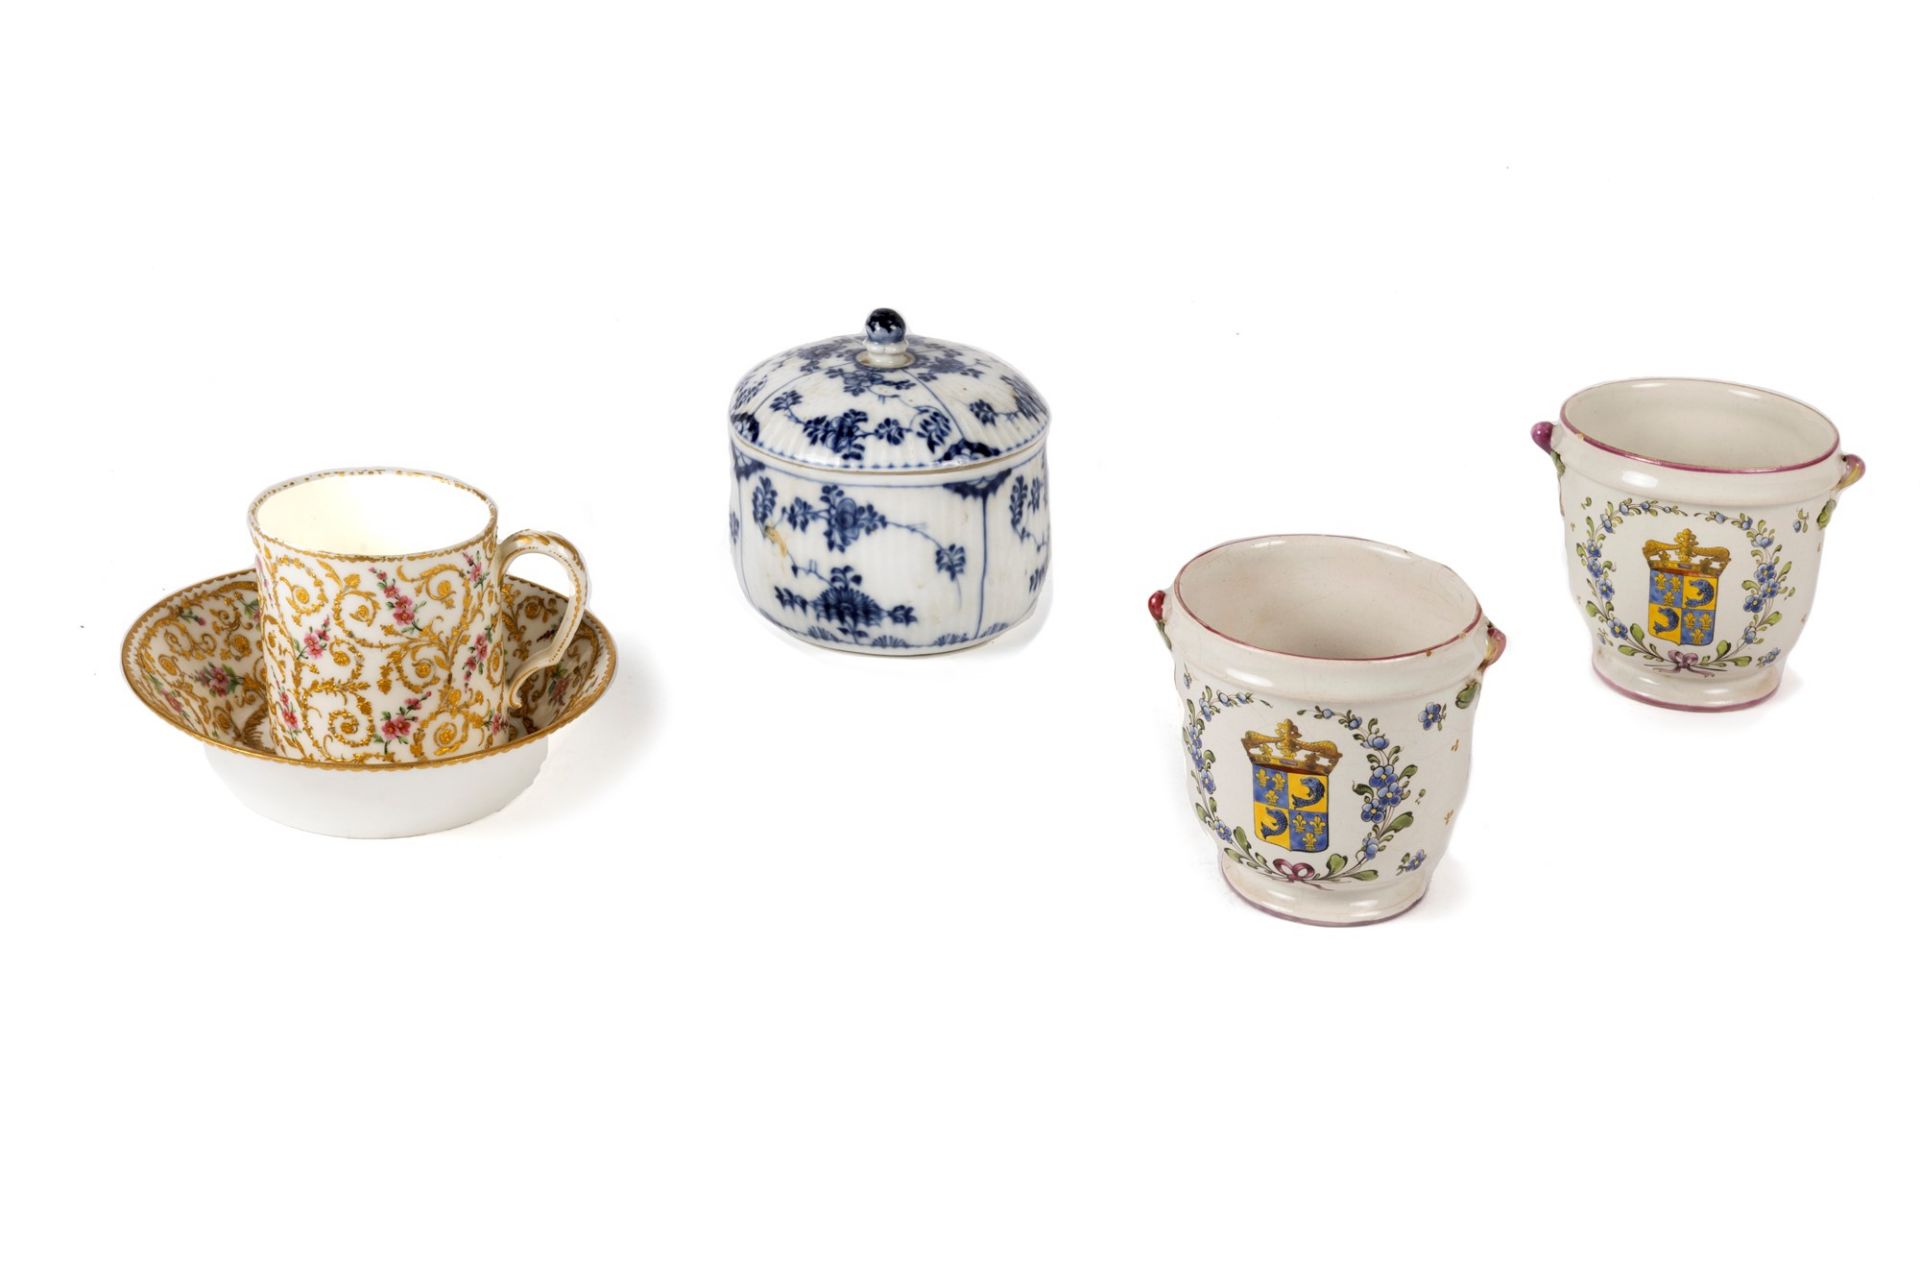 Lot composed of two porcelain objects: a cup, a potiche; and a pair of majolica vases, 18th-19th cen